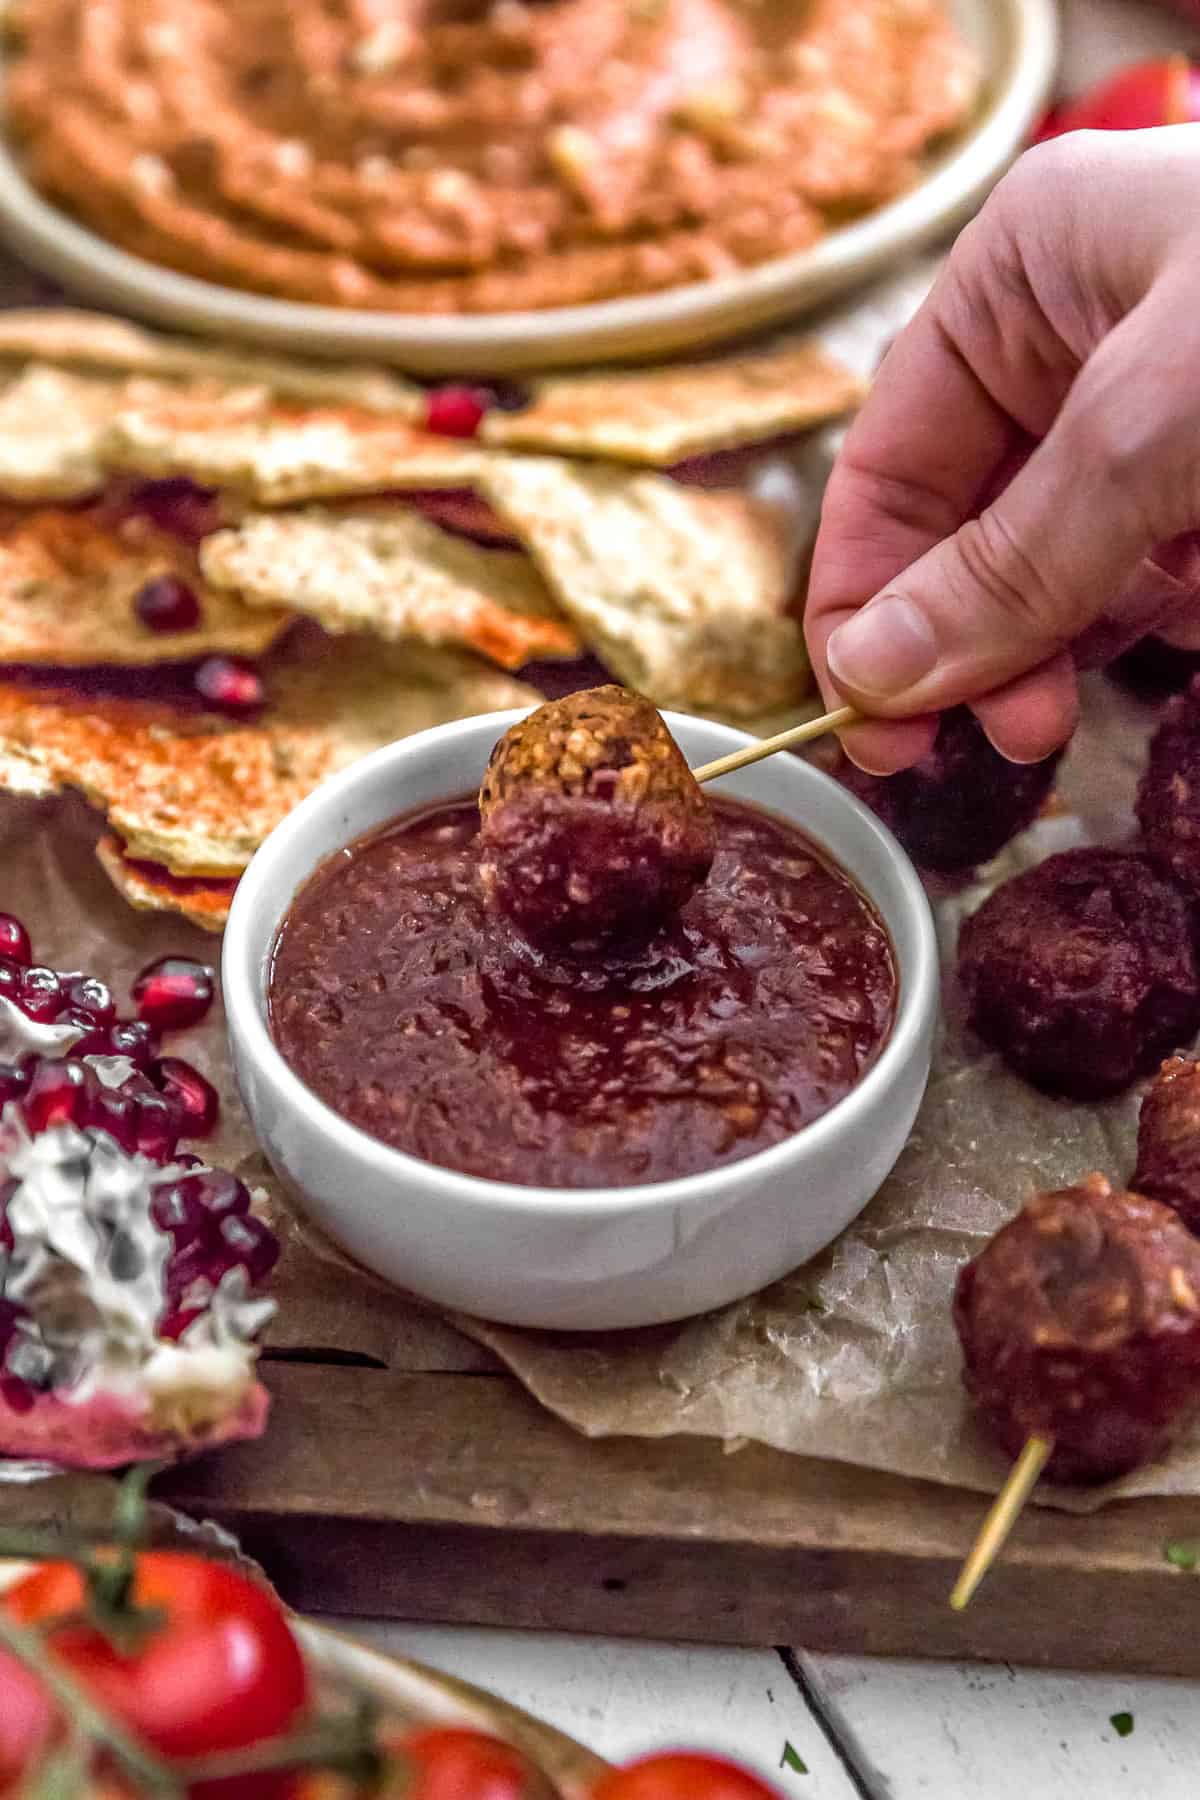 Dipping Vegan Cocktail Meatballs in Healthy Chili Sauce